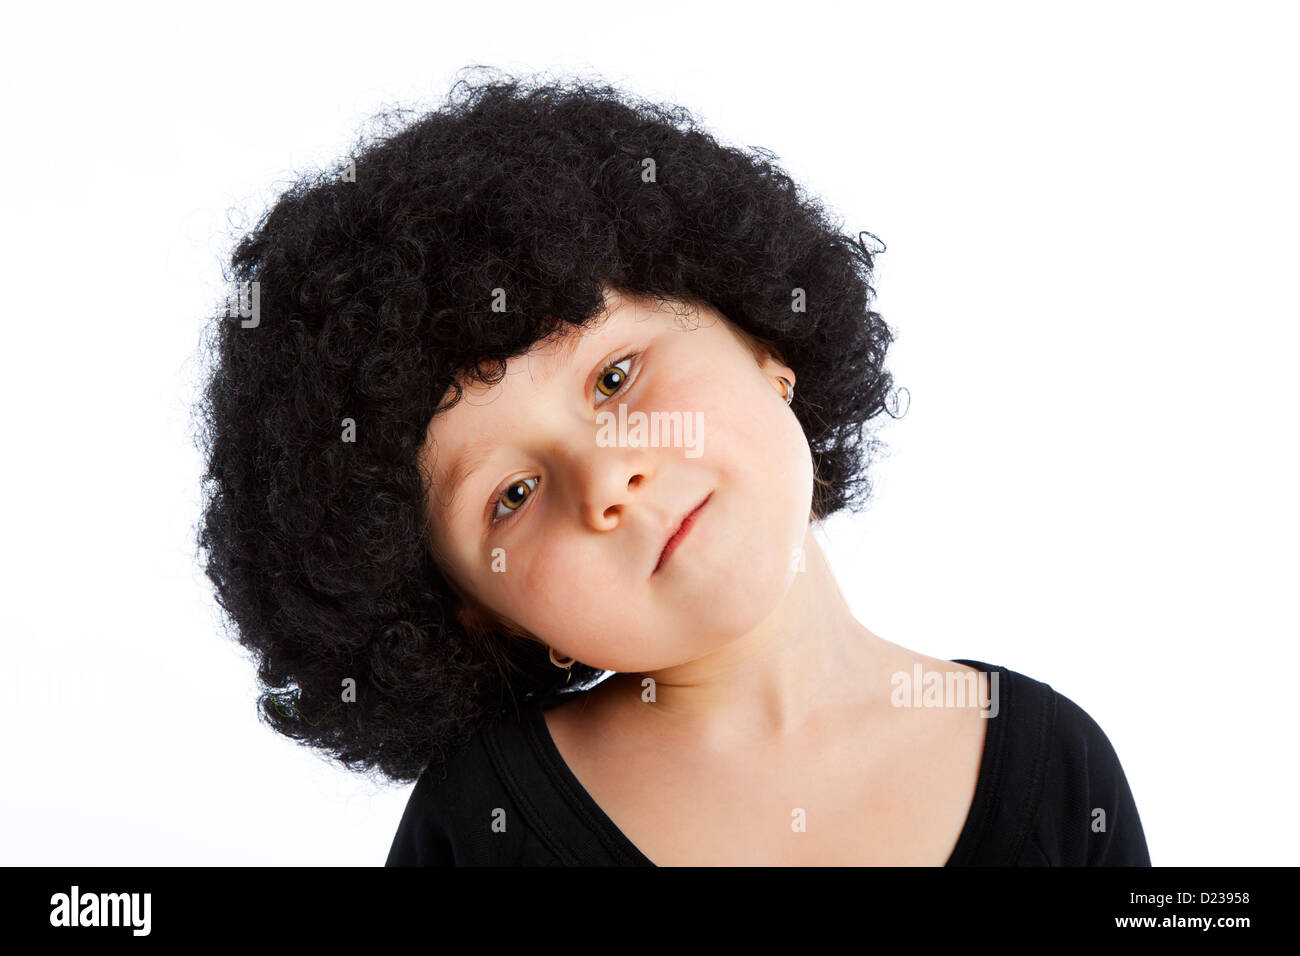 Portrait of girl child with afro wig. Stock Photo